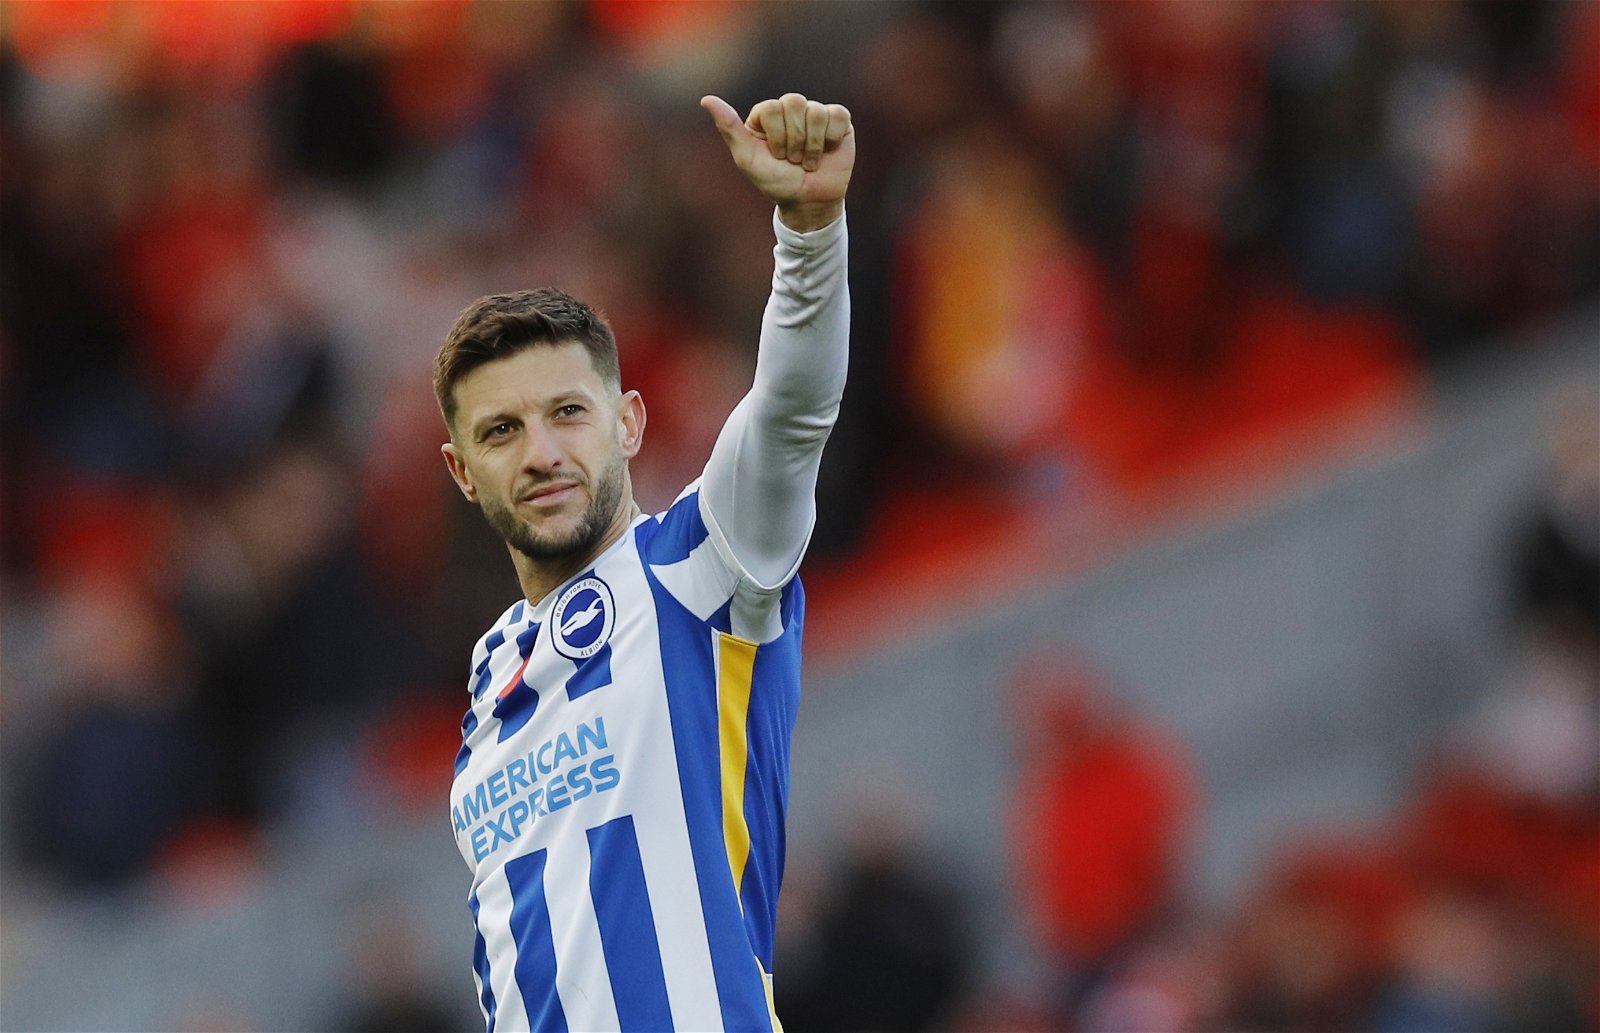 Brighton & Hove Albion highest-paid player 2022